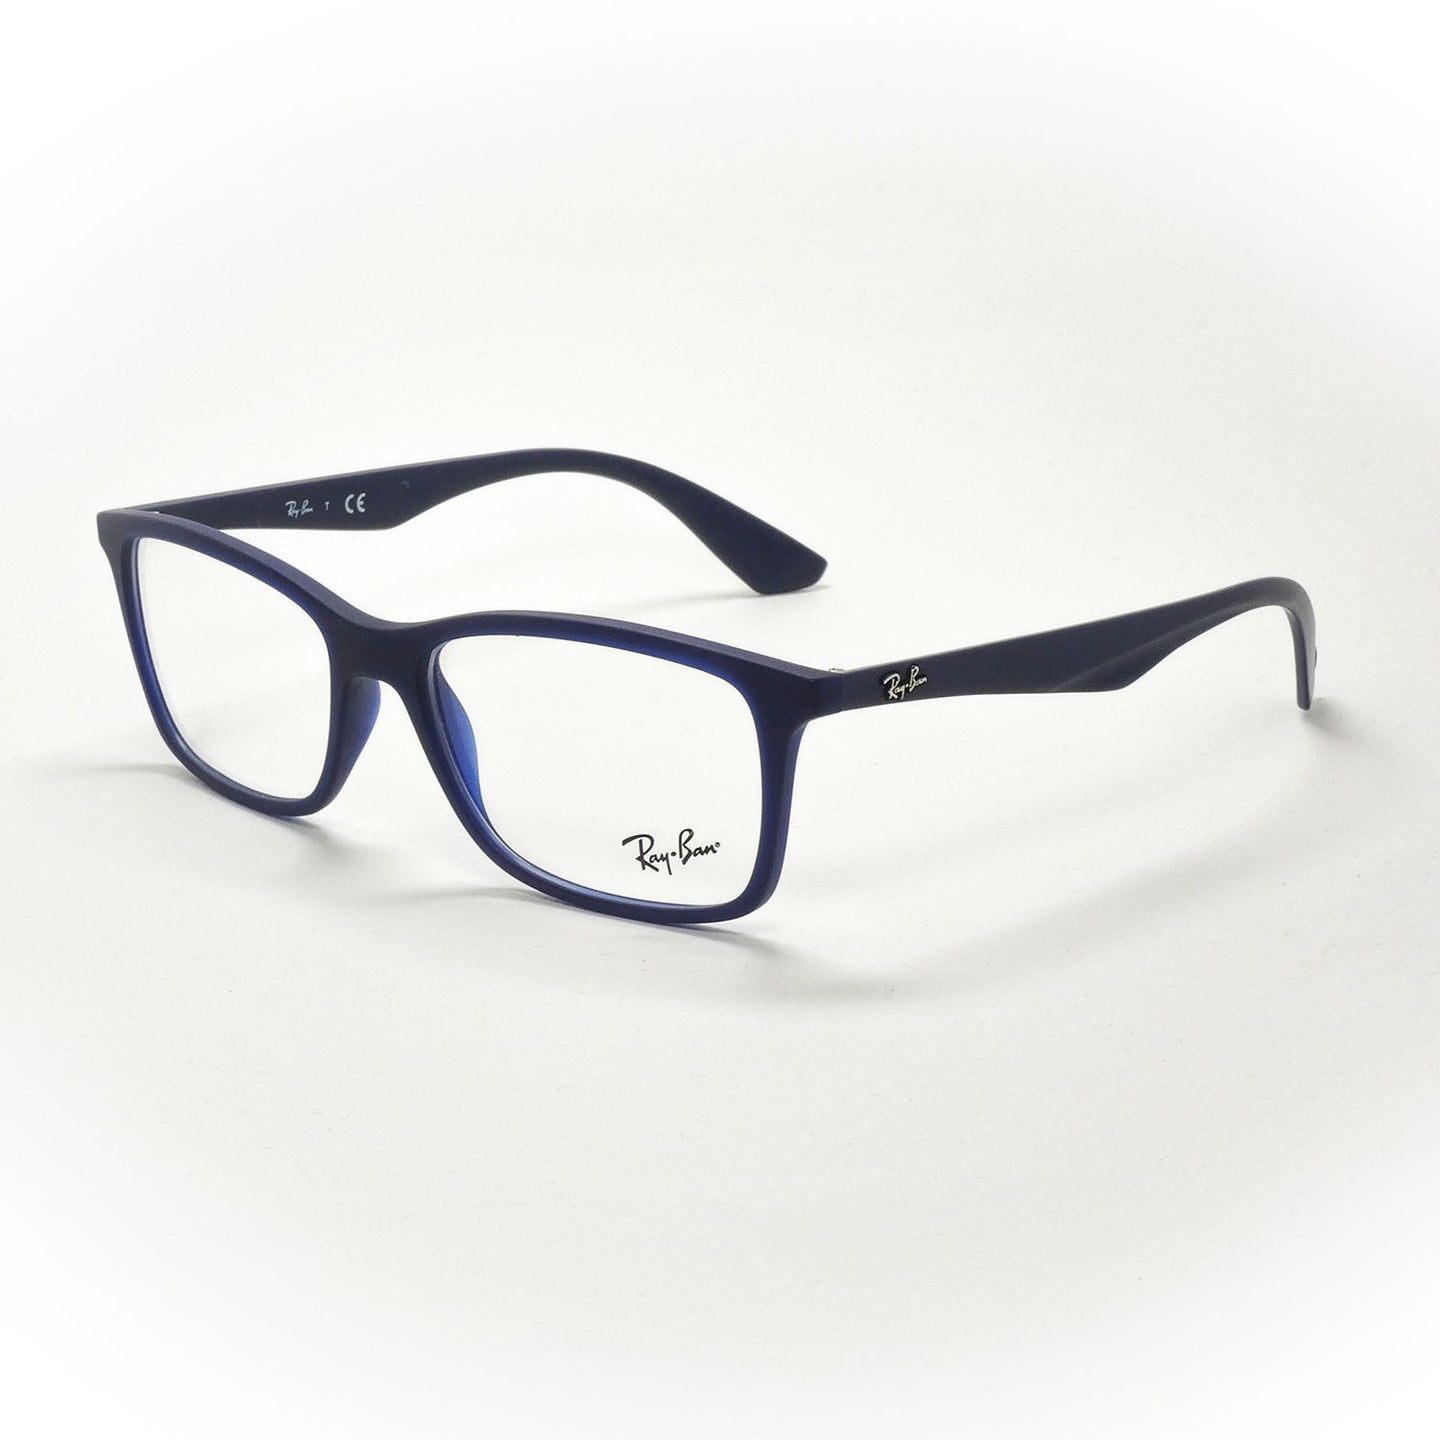 Vision glasses Ray Ban Model RB 7047 Color 5450 angled view